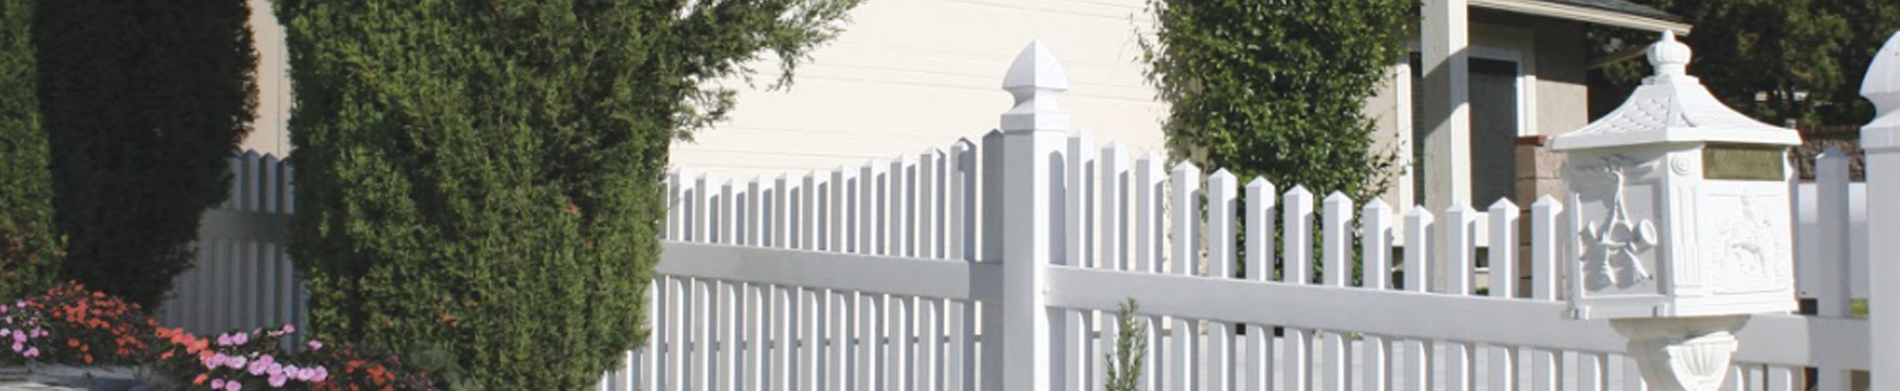 Installing a vinyl fence around your house – A solution for 30 years or more